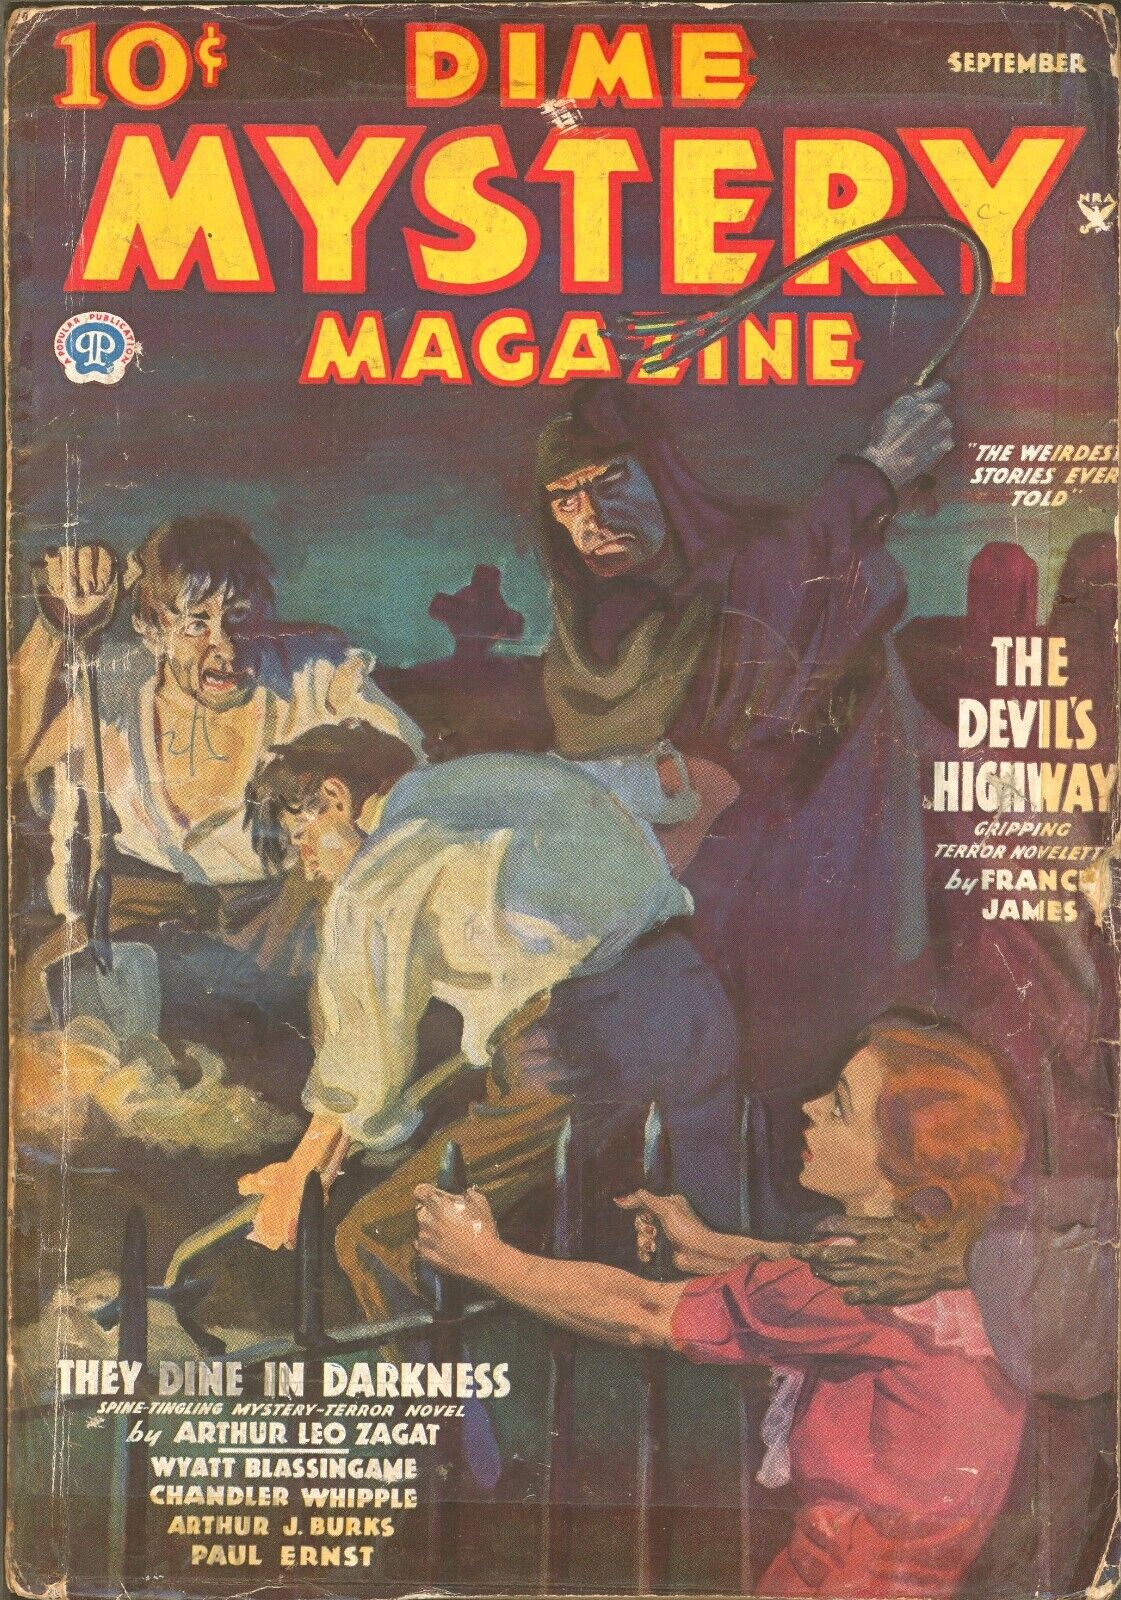 Dime Mystery 1935 September. Graveyard, whipping cover.  Pulp